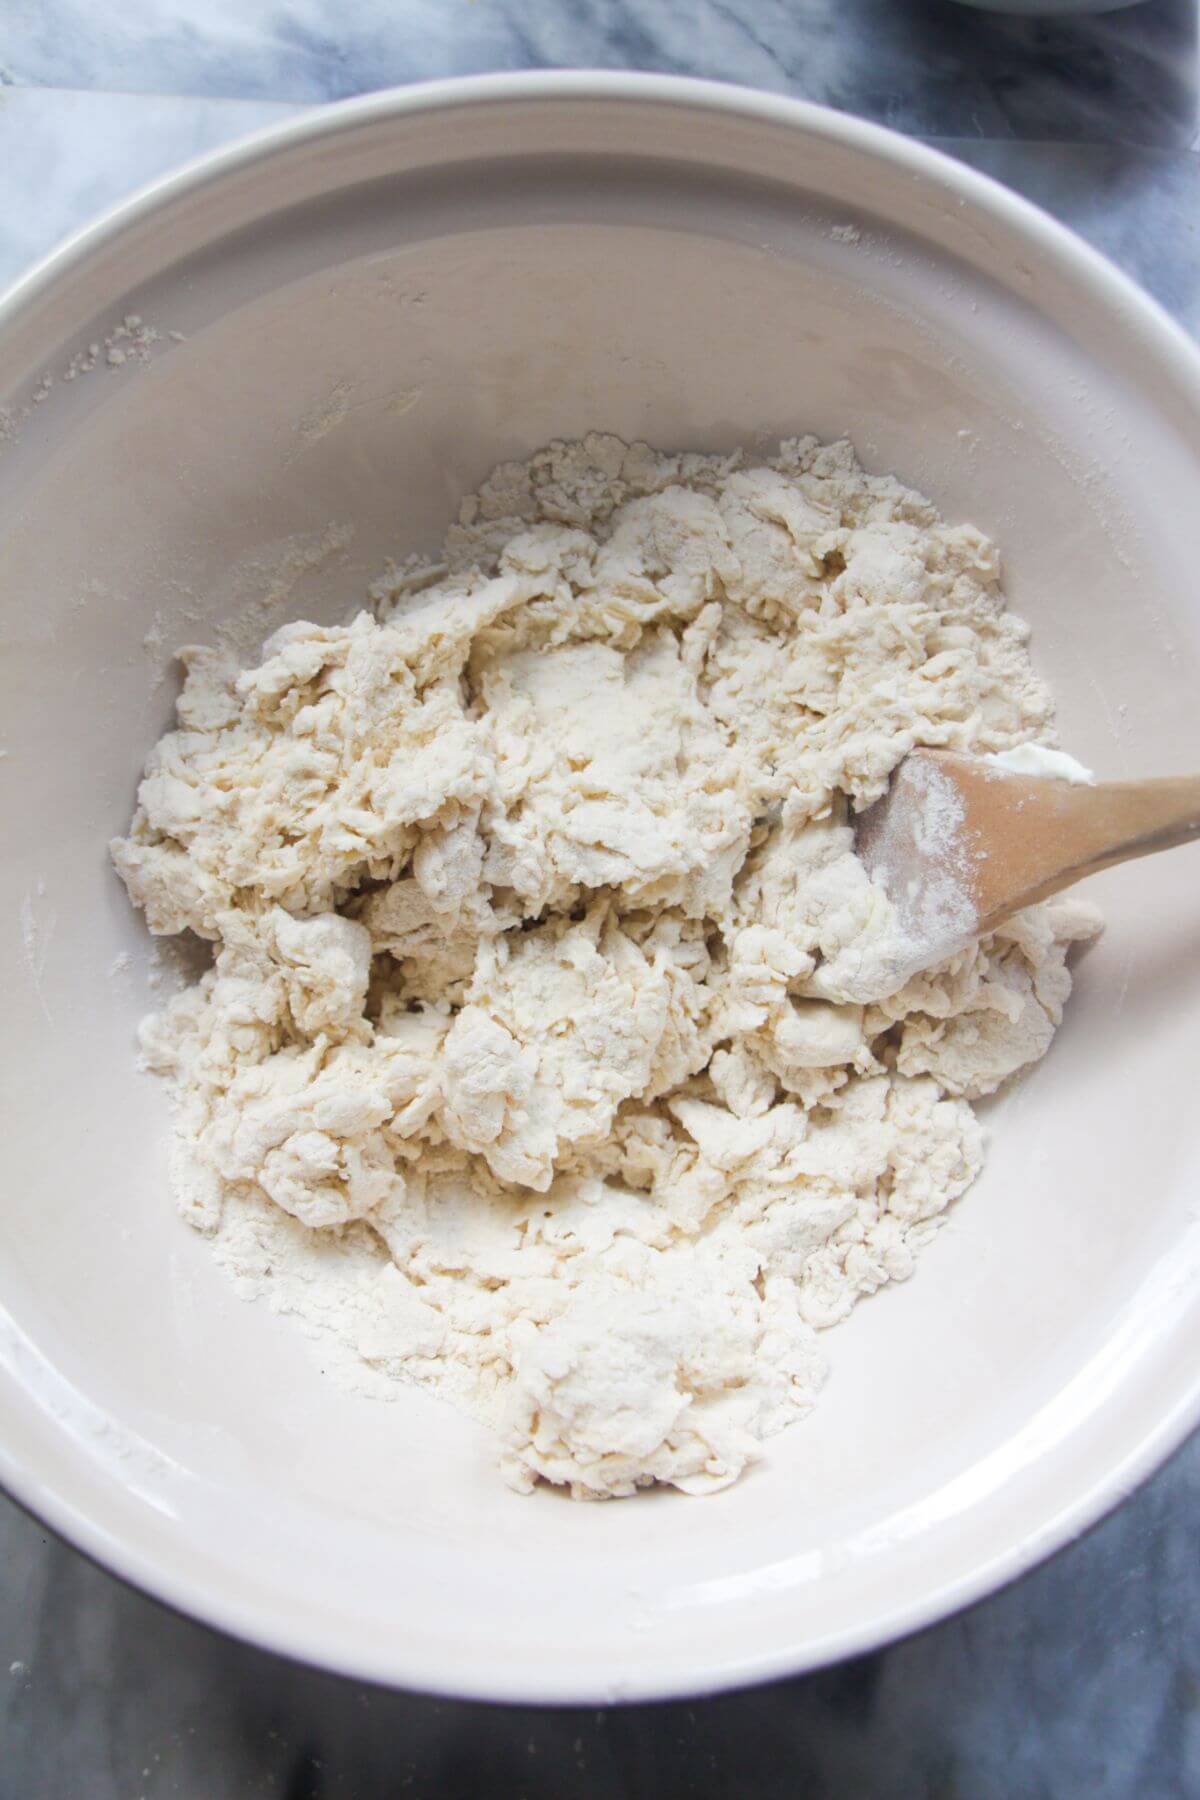 Rough, shaggy dough after being mixed with a large wooden spoon in a large ceramic bowl.